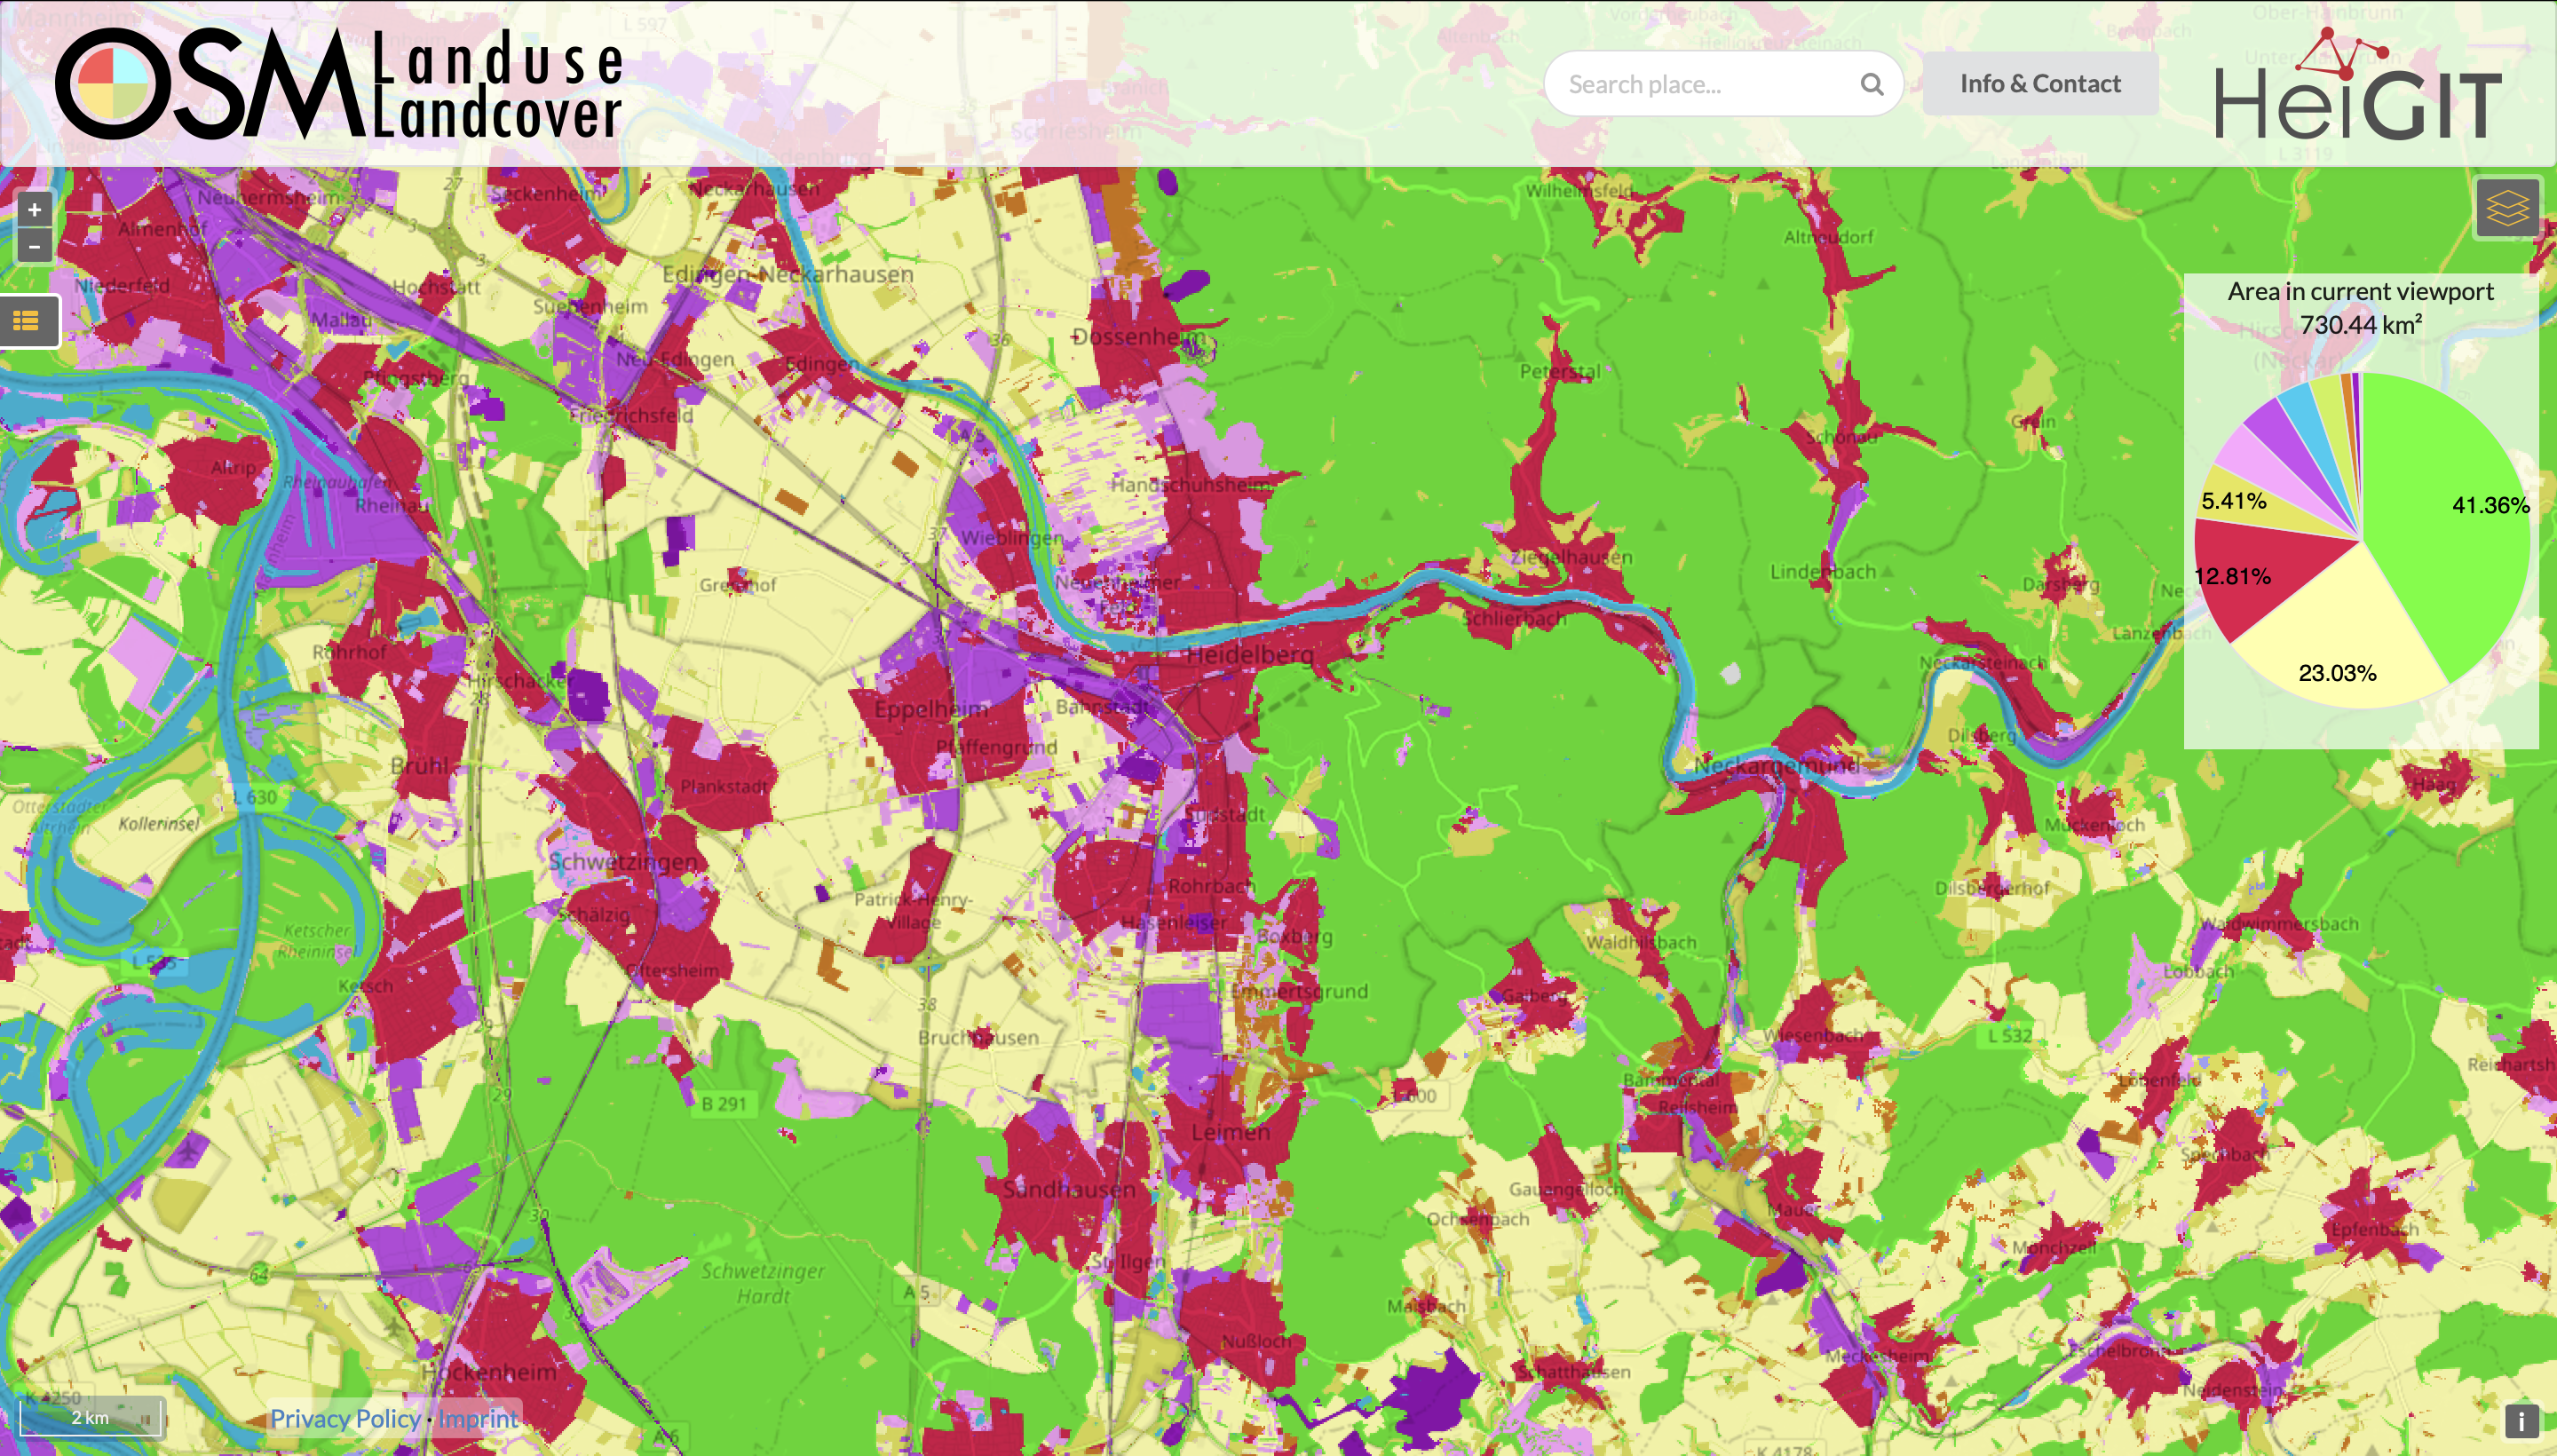 Functionality Update for OSM Landuse Landcover